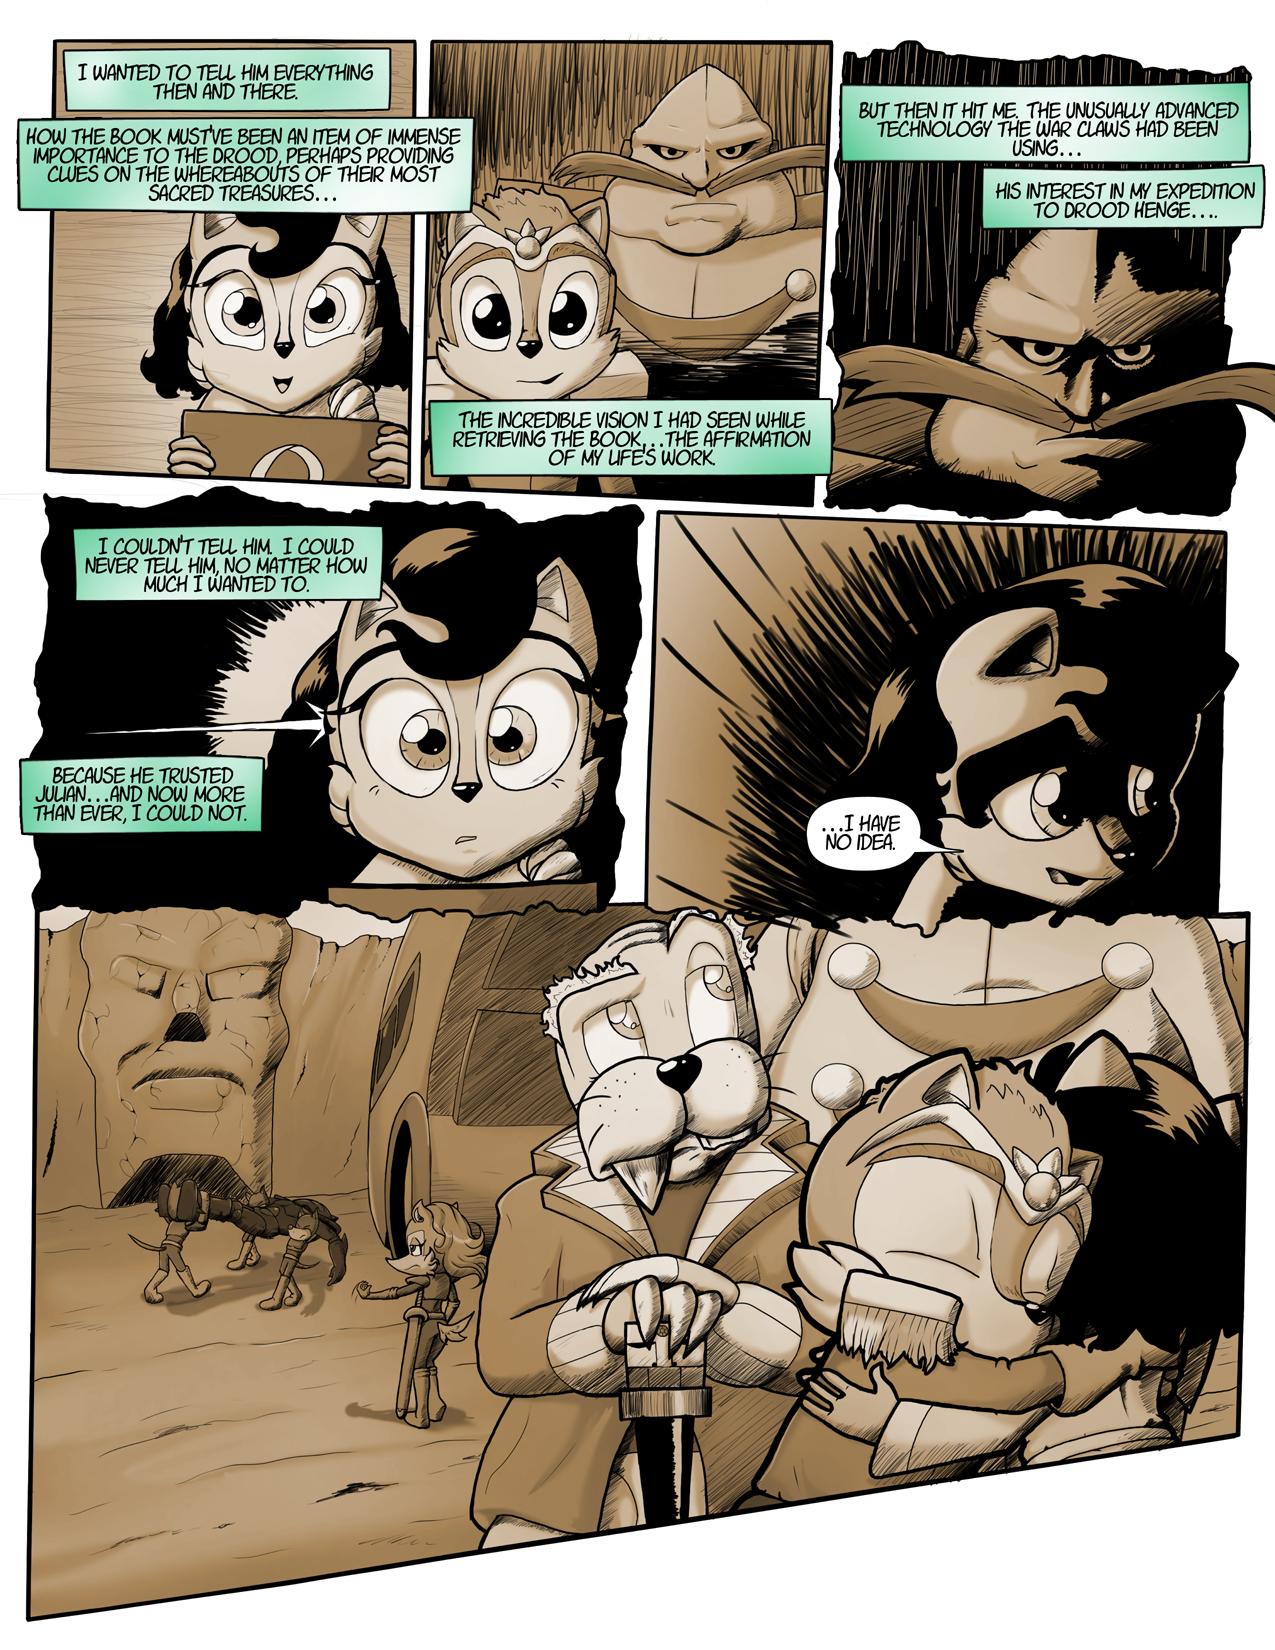 Chapter 5, page 34